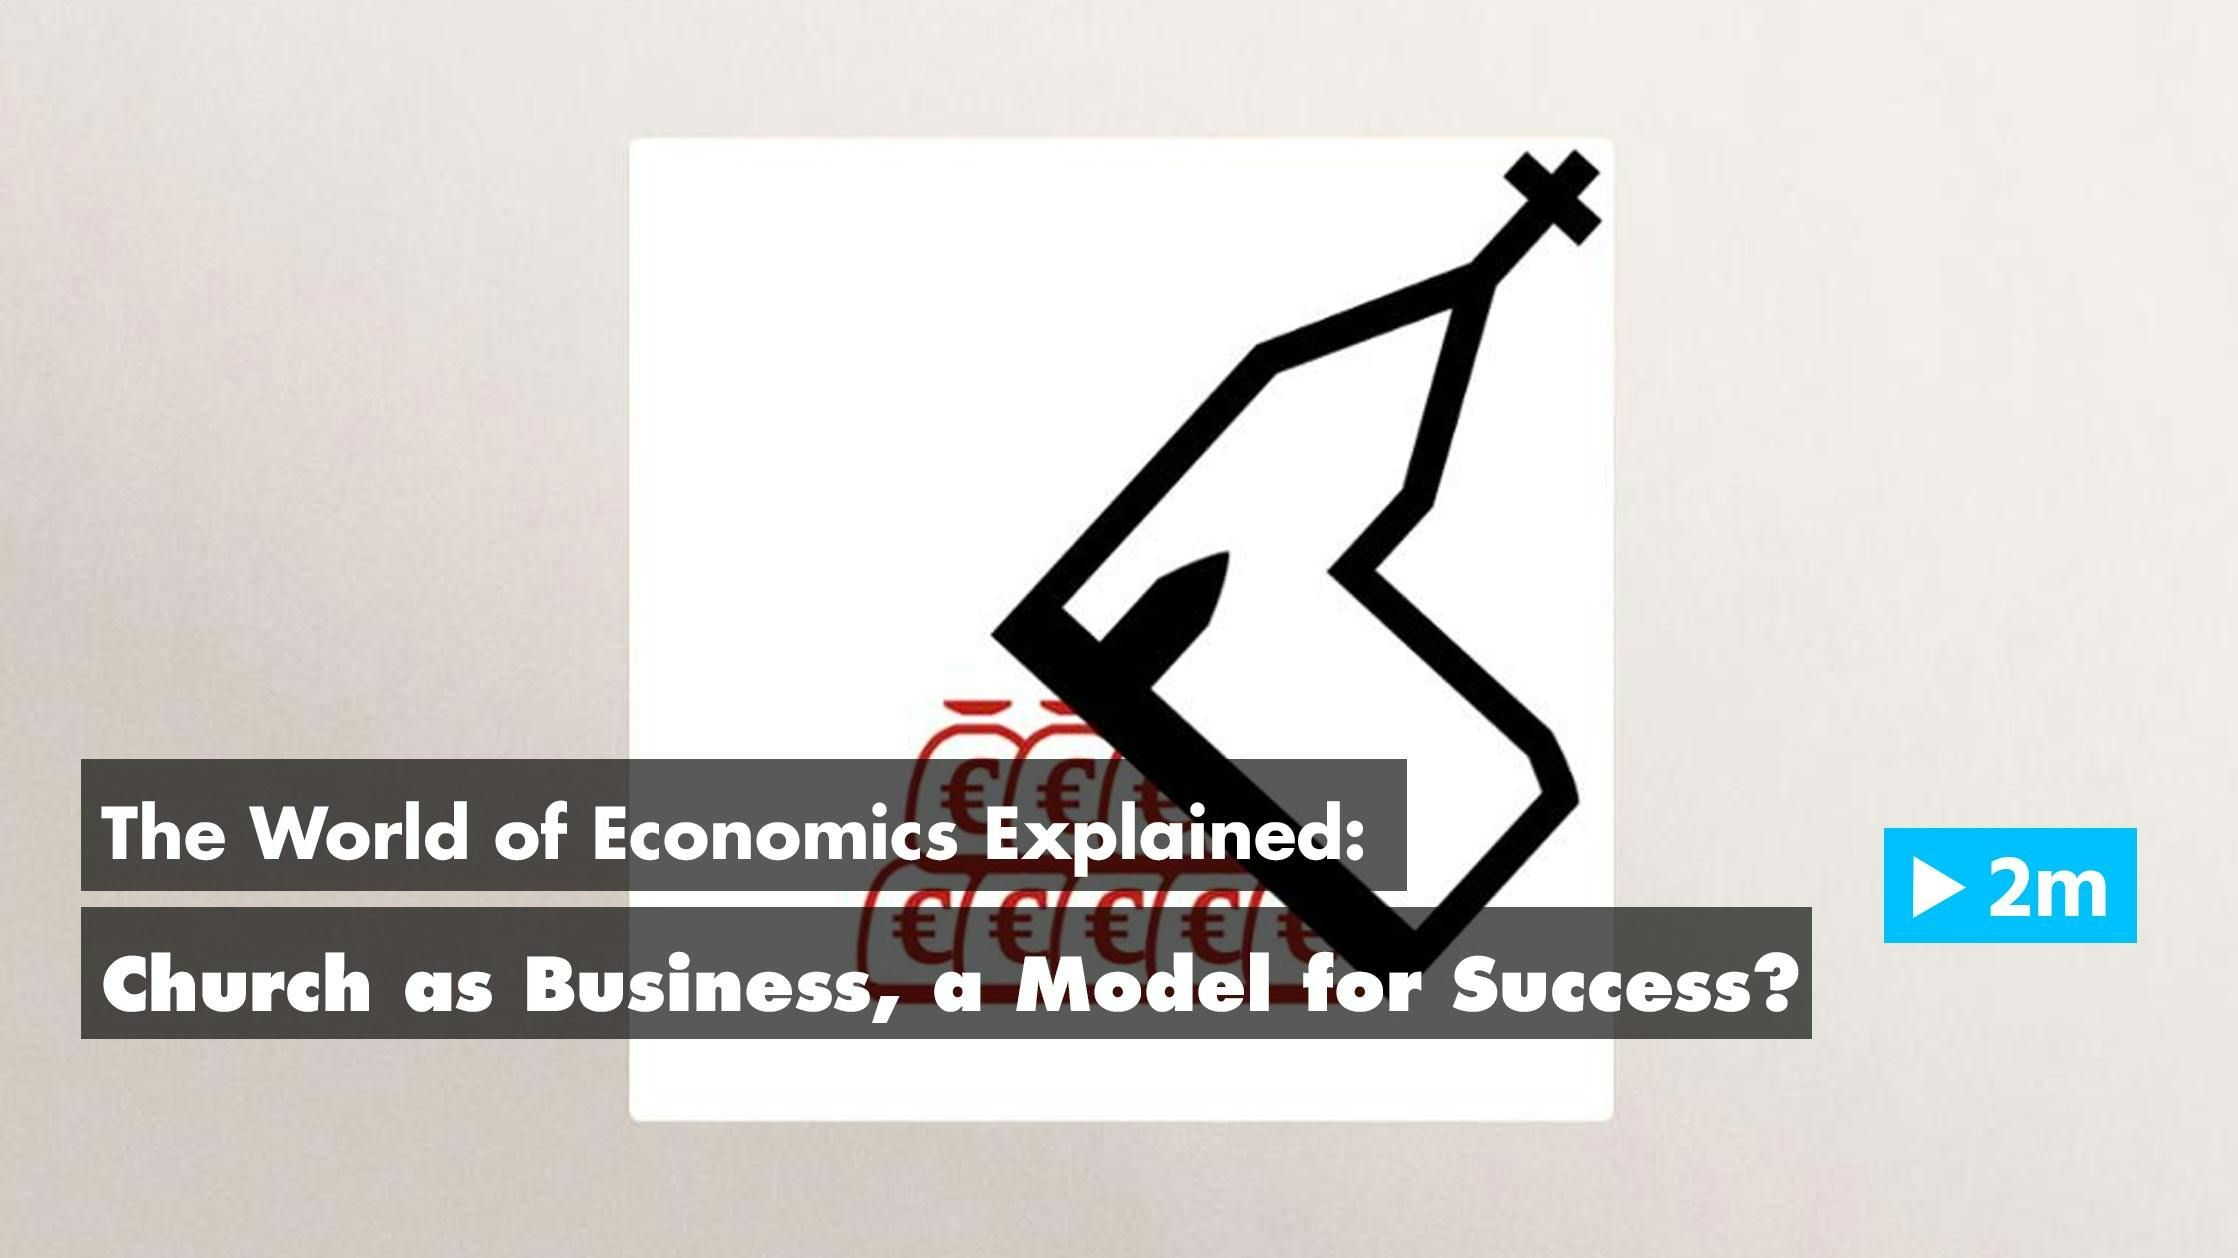 The World of Economics Explained: Church business, a model for success